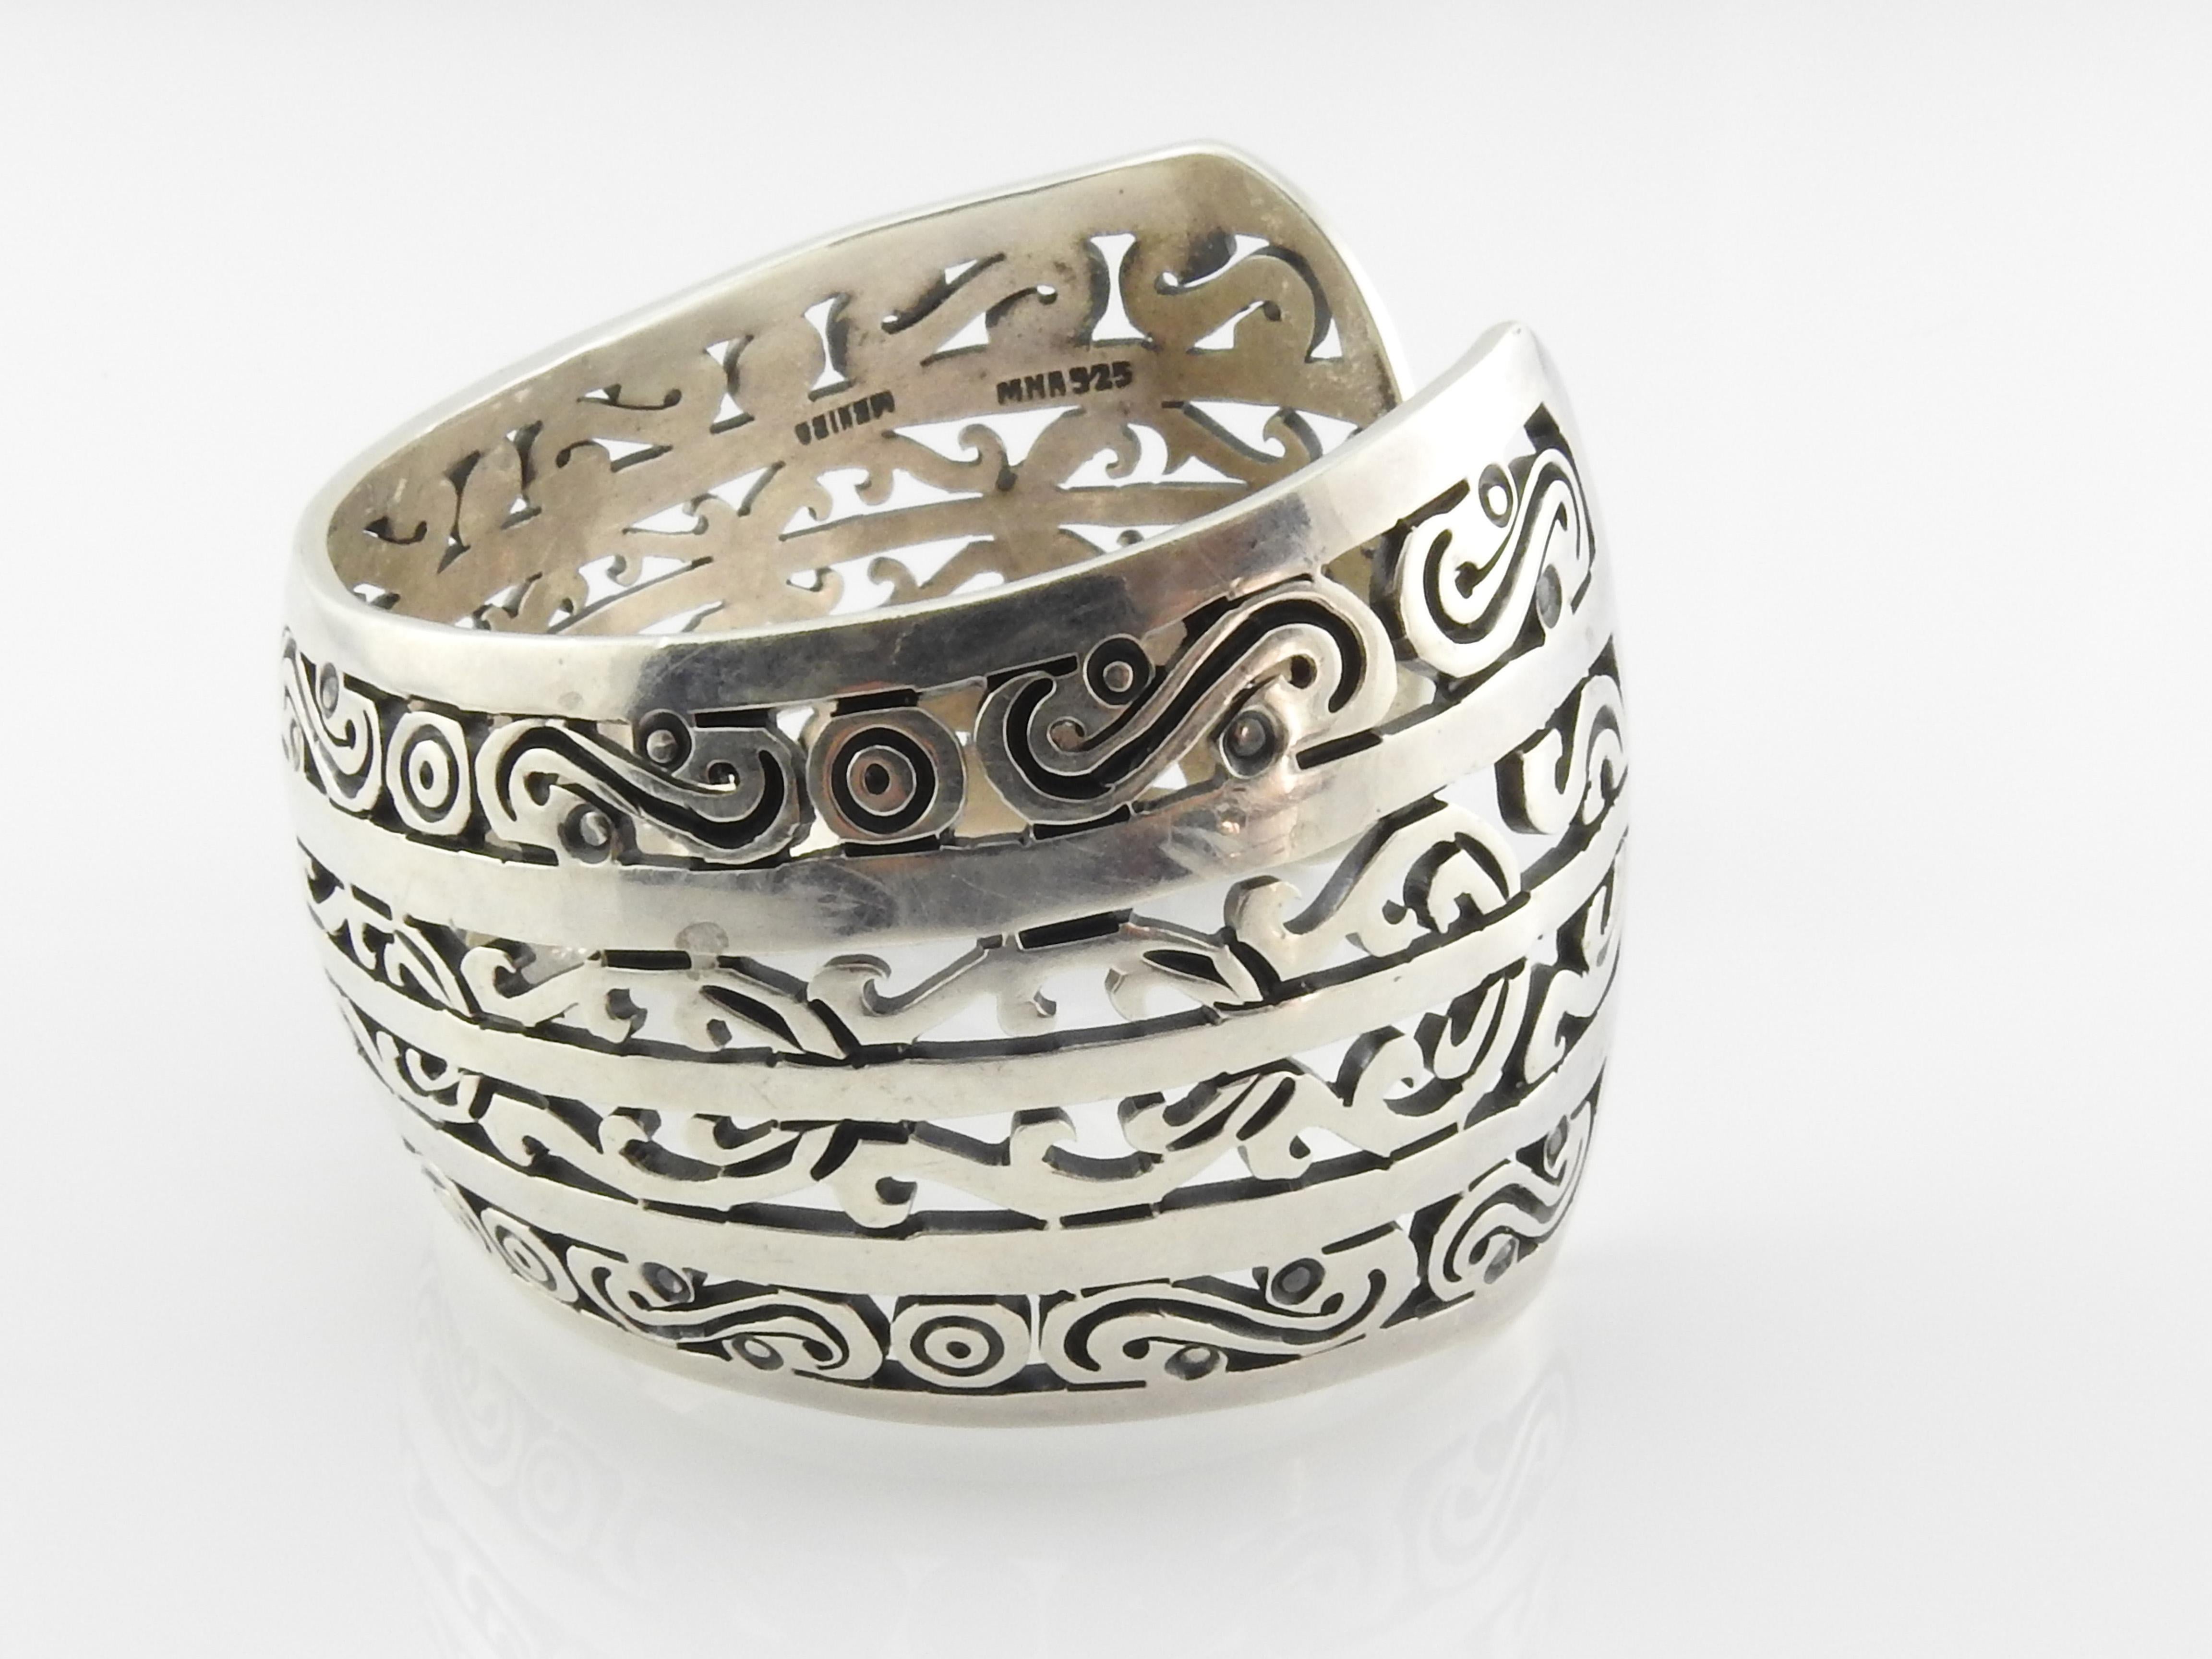 MMA Mexico sterling silver wide cuff bracelet with a cut-out scroll design.

Marked: MMA 925 MEXICO

Measures: 7